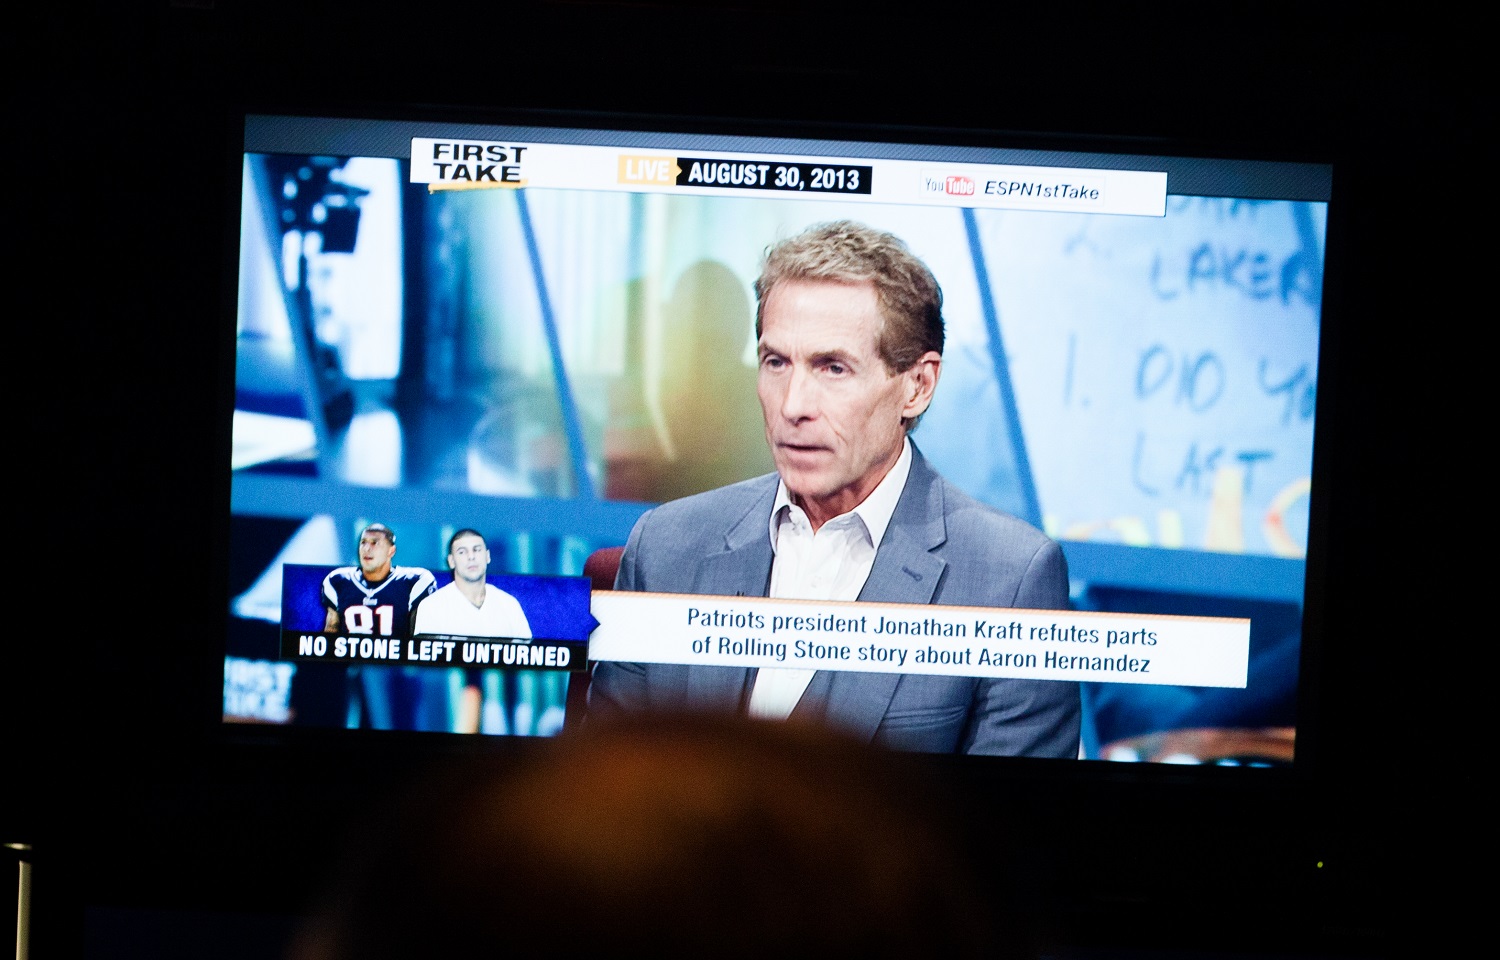 Sports journalist and TV personality, Skip Bayless moved from ESPN to Fox Sports in 2016. | Christopher Capozziello/Washington Post via Getty Images